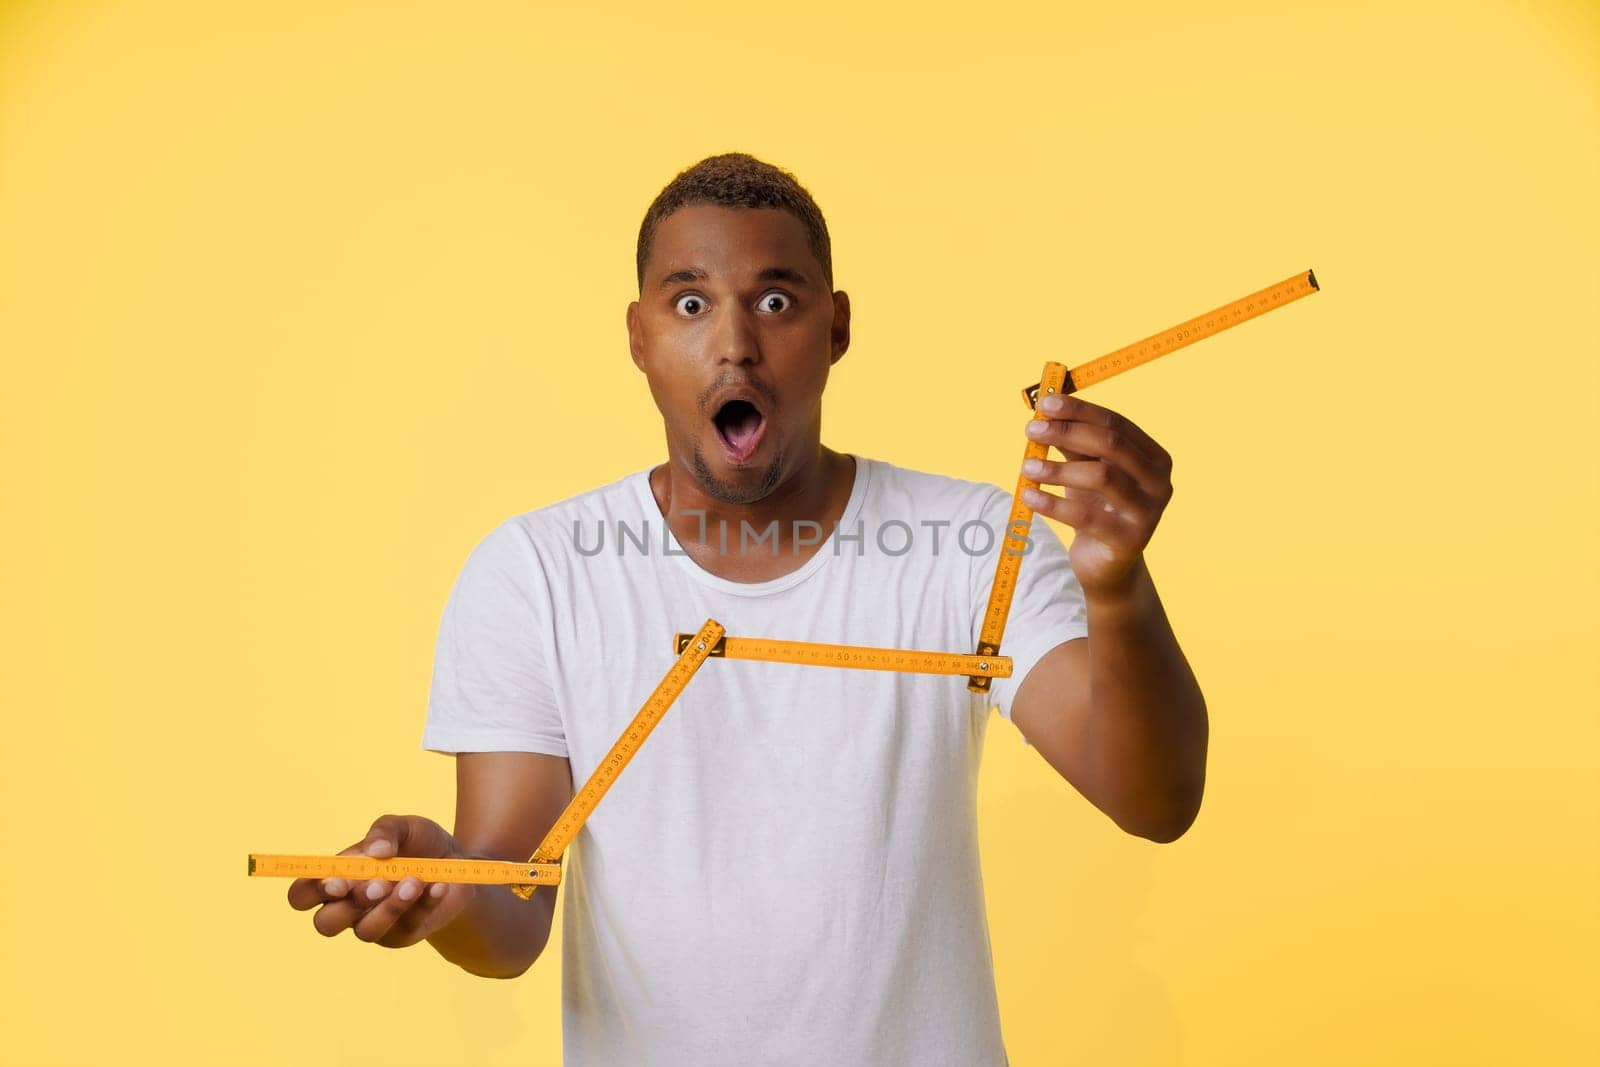 Concept of income growth, amazed African American man holding folding ruler and showing growth chart on the stock exchange. Man is standing on bright yellow background with copy space for designers to add their own text or graphics. by LipikStockMedia